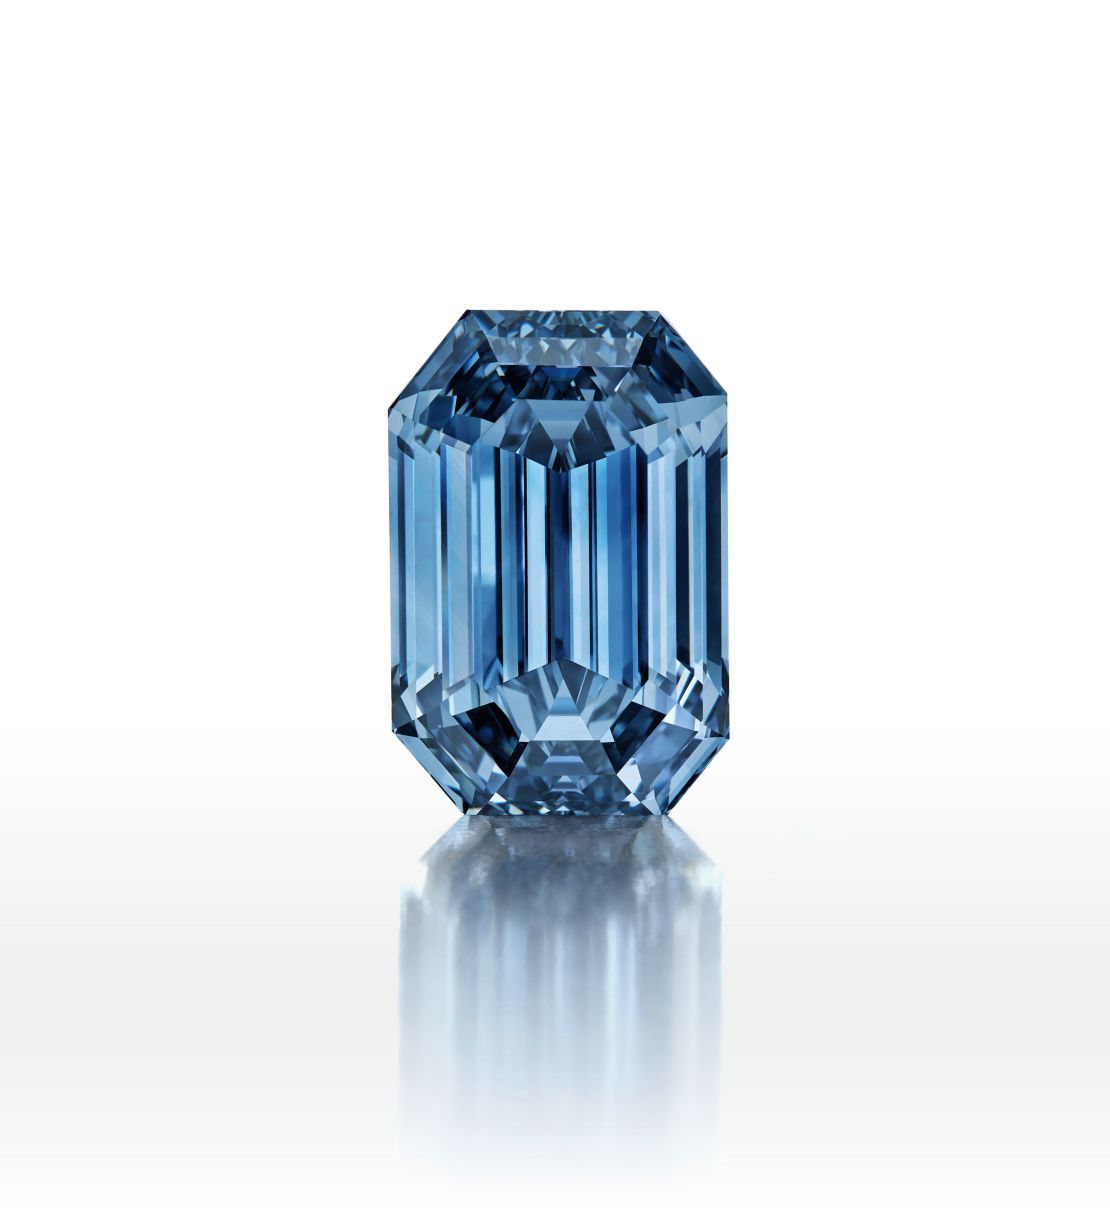 The gem is the biggest vivid blue diamond to come to auction, according to Sotheby's.